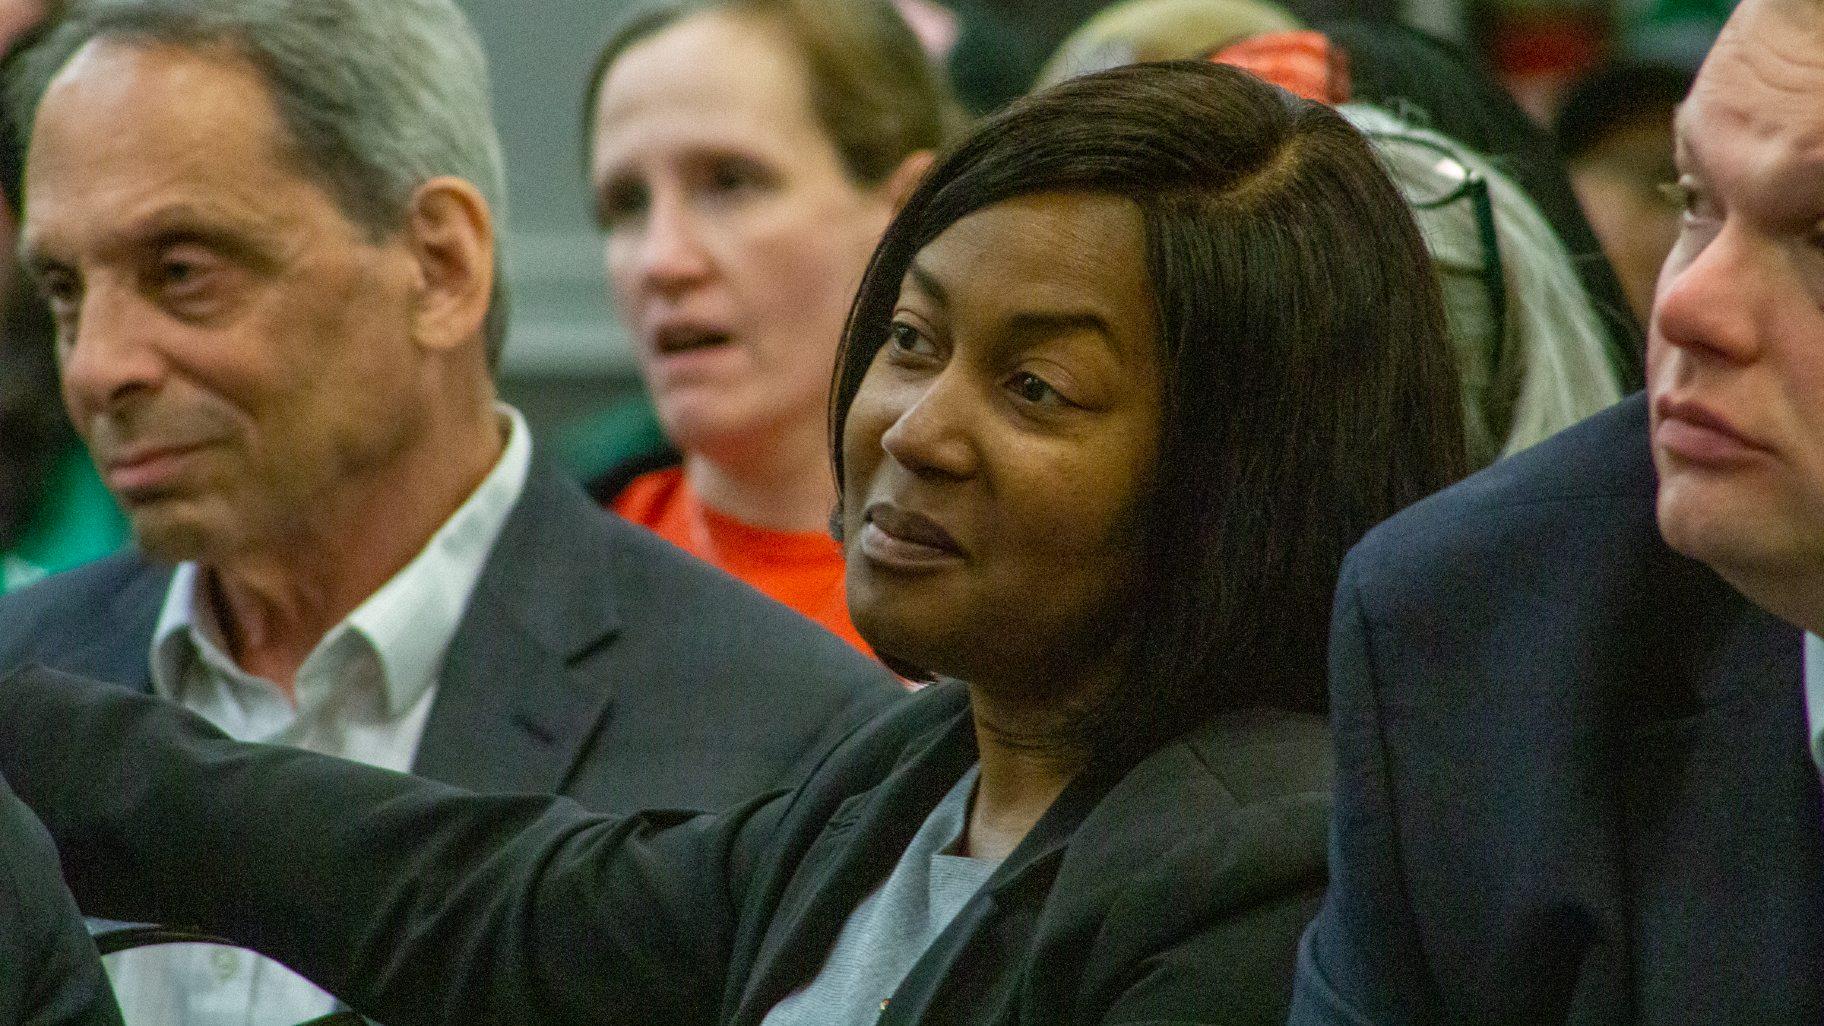 Latoya Hughes, acting director of the Illinois Department of Corrections, sits in the crowd at a public Commission on Government Forecasting and Accountability hearing in Joliet on June 11, 2024. (Dilpreet Raju / Capitol News Illinois)